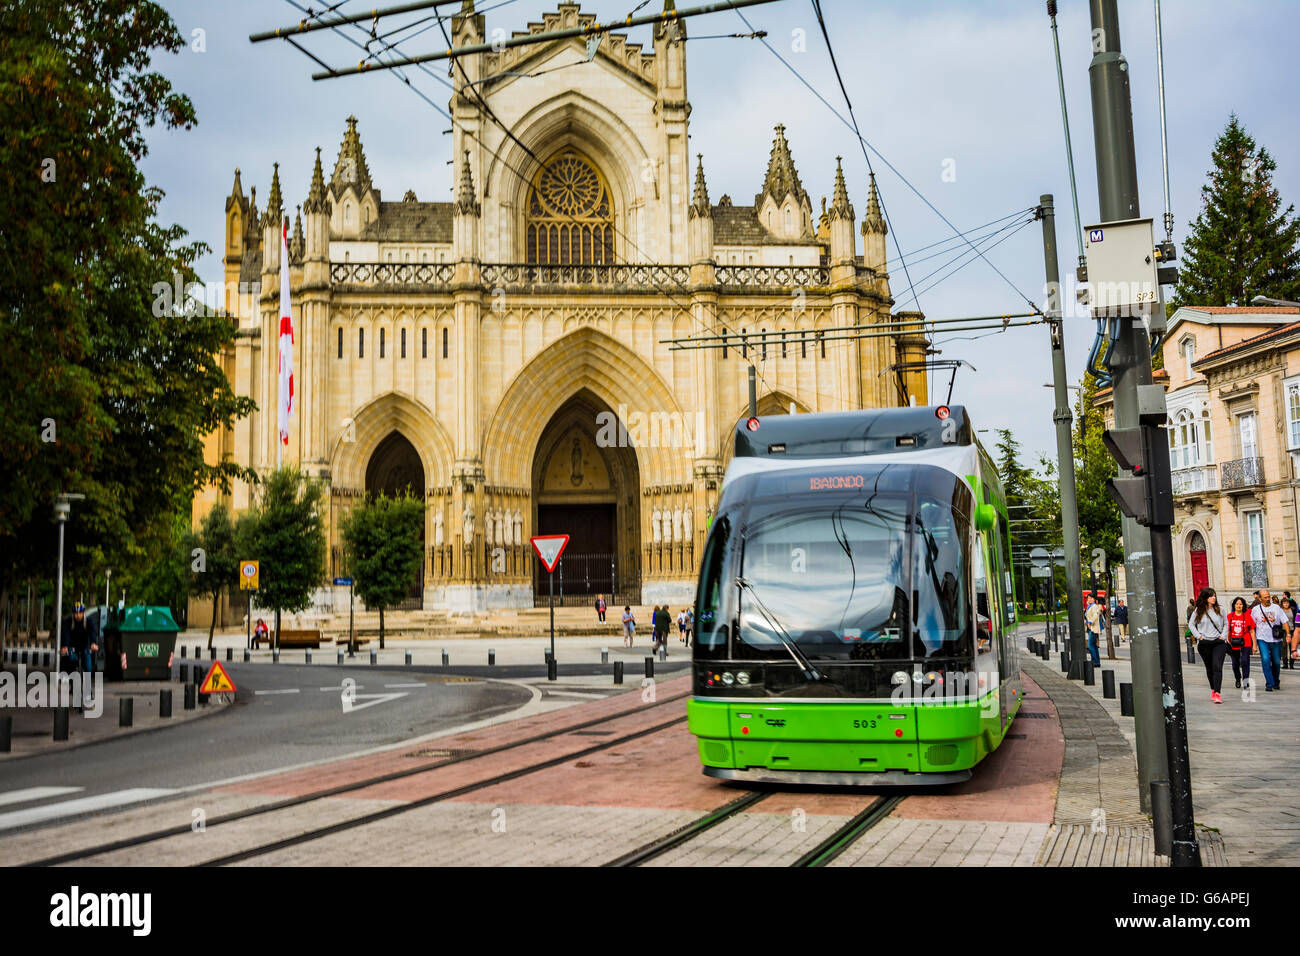 Cathedral of Mary Immaculate, New Cathedral, and tram. Vitoria-Gasteiz, Álava, Basque Country, Spain, Europe Stock Photo